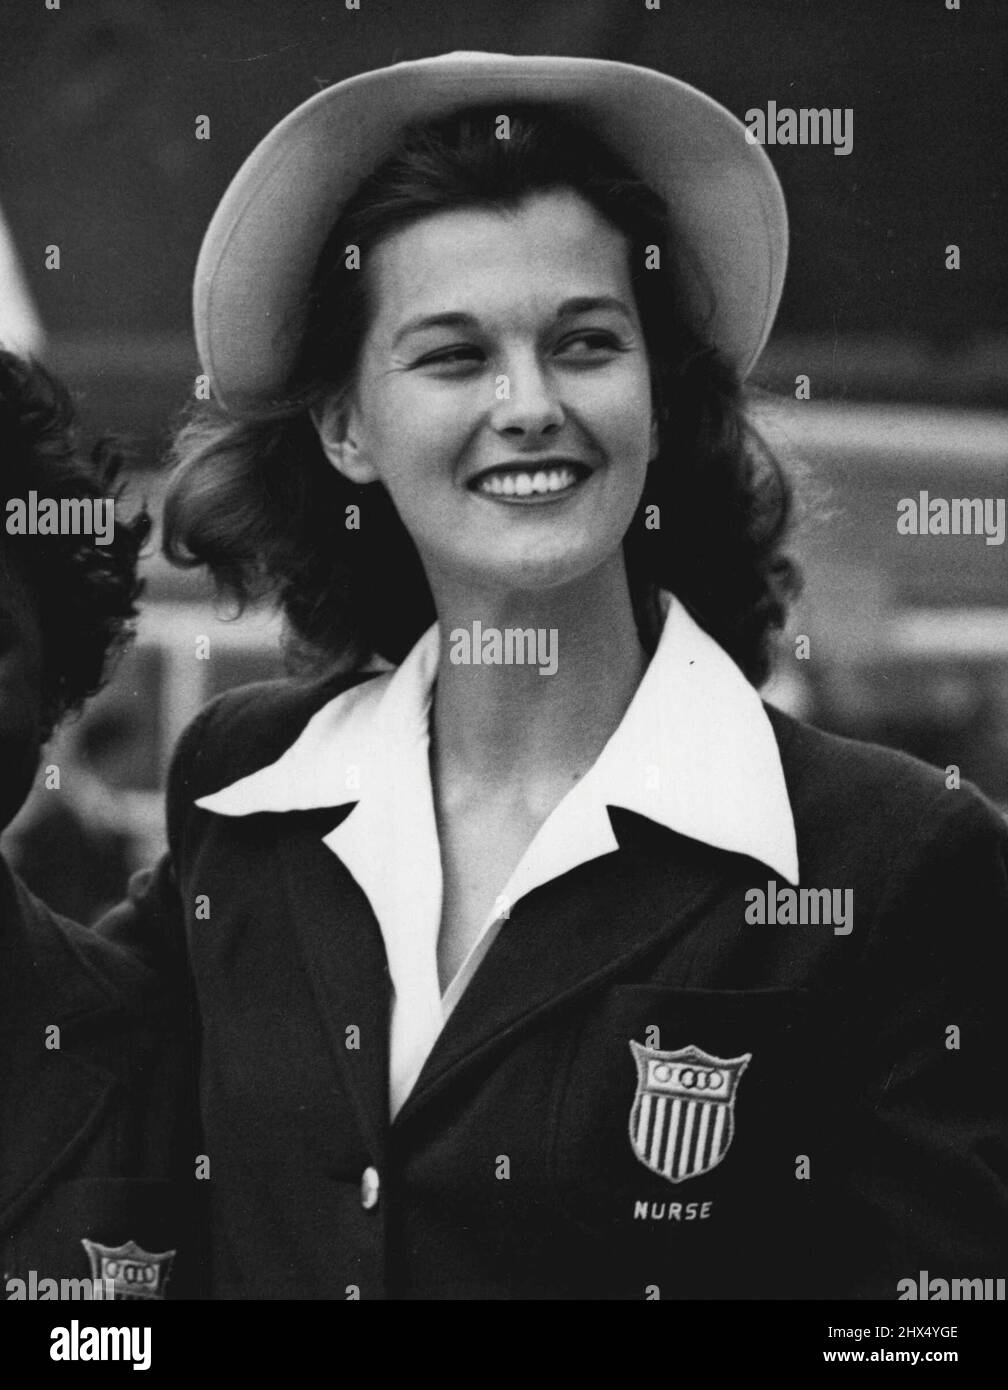 'Picture Of Health' Nurse Comes With Olympic Team: Smiling Nurse Dorothy Whitley, has arrived with the U.S. Olympic team, aboard the S.S. America, at Southampton, to-day (Wednesday). Charged with guarding the health of her athletic charges, Dorothy makes sickness 'almost a pleasure'. Her team says 'What a nurse'. She comes from Washington, D.C. July 21, 1948. (Photo by Reuterphoto) Stock Photo